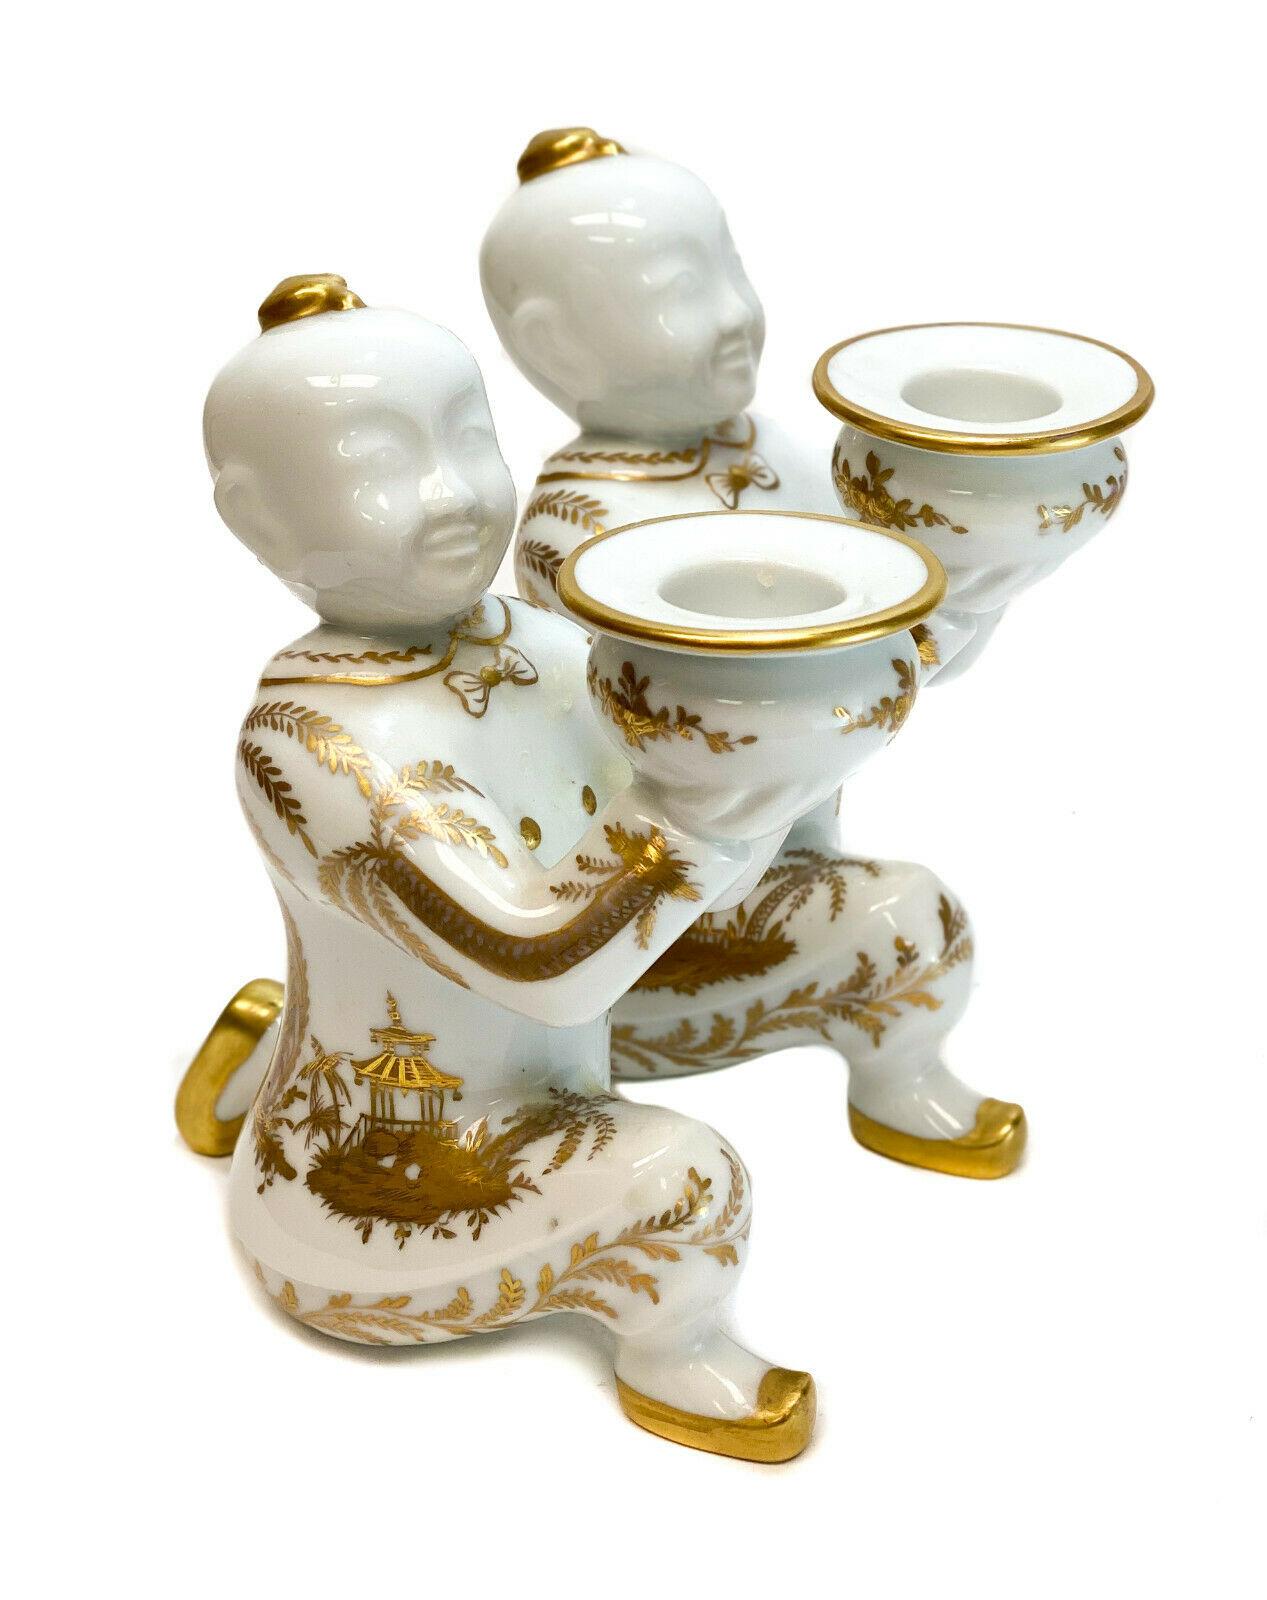 Tiffany & Co. France Private Stock Le Tallec candlesticks in doré Chinois Cirque. The candlesticks depict two chinosorie males kneeling and holding up a bowl. Beautiful gold palm trees and temples all-over the bodies. Tiffany & Co. France Private